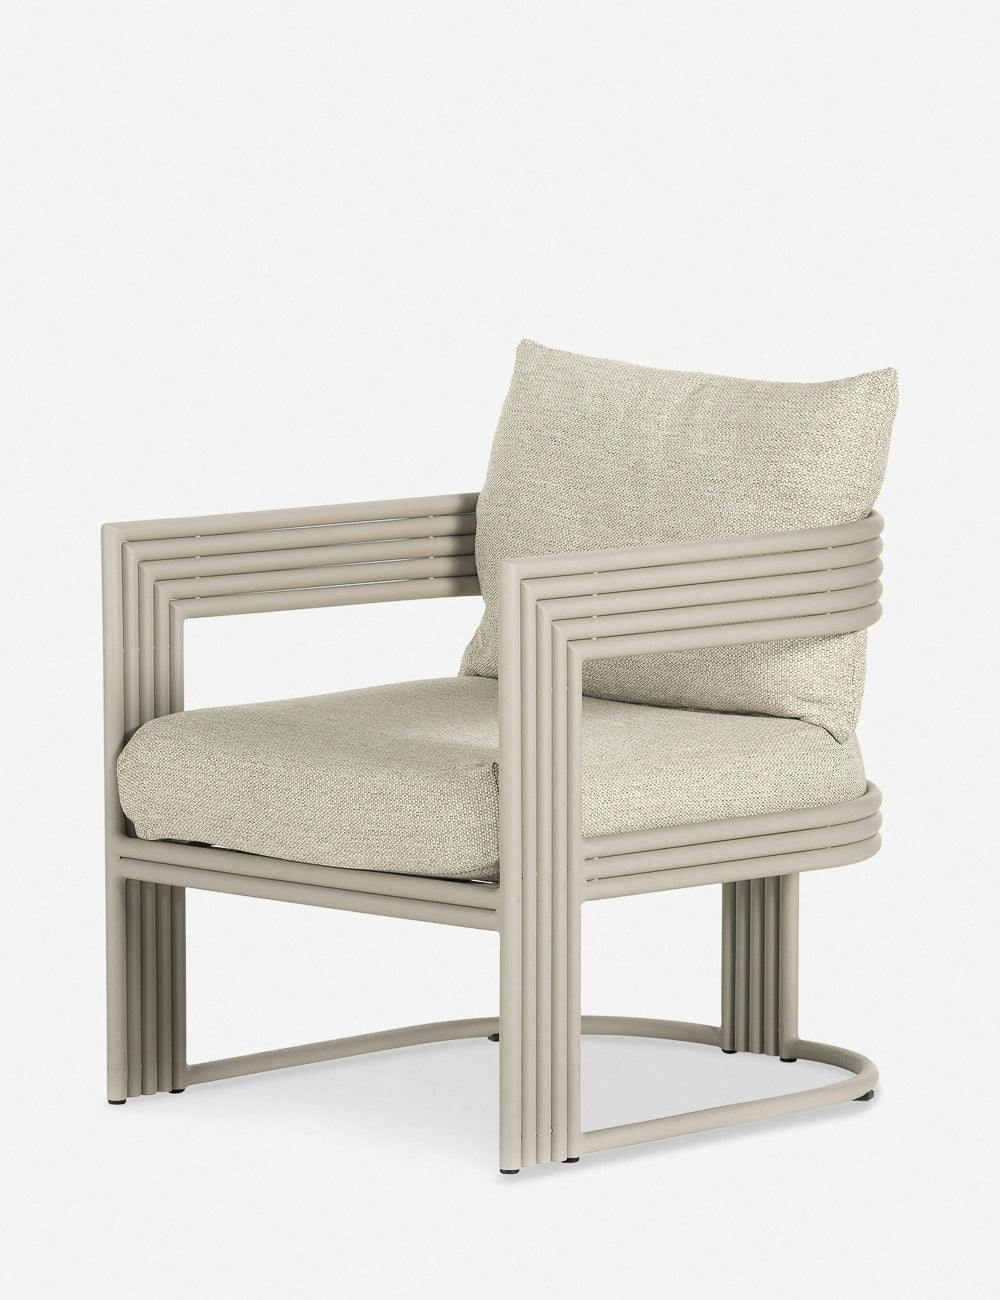 Lany Mid Century Modern Beige Upholstered Aluminum Frame Outdoor Dining Arm Chair